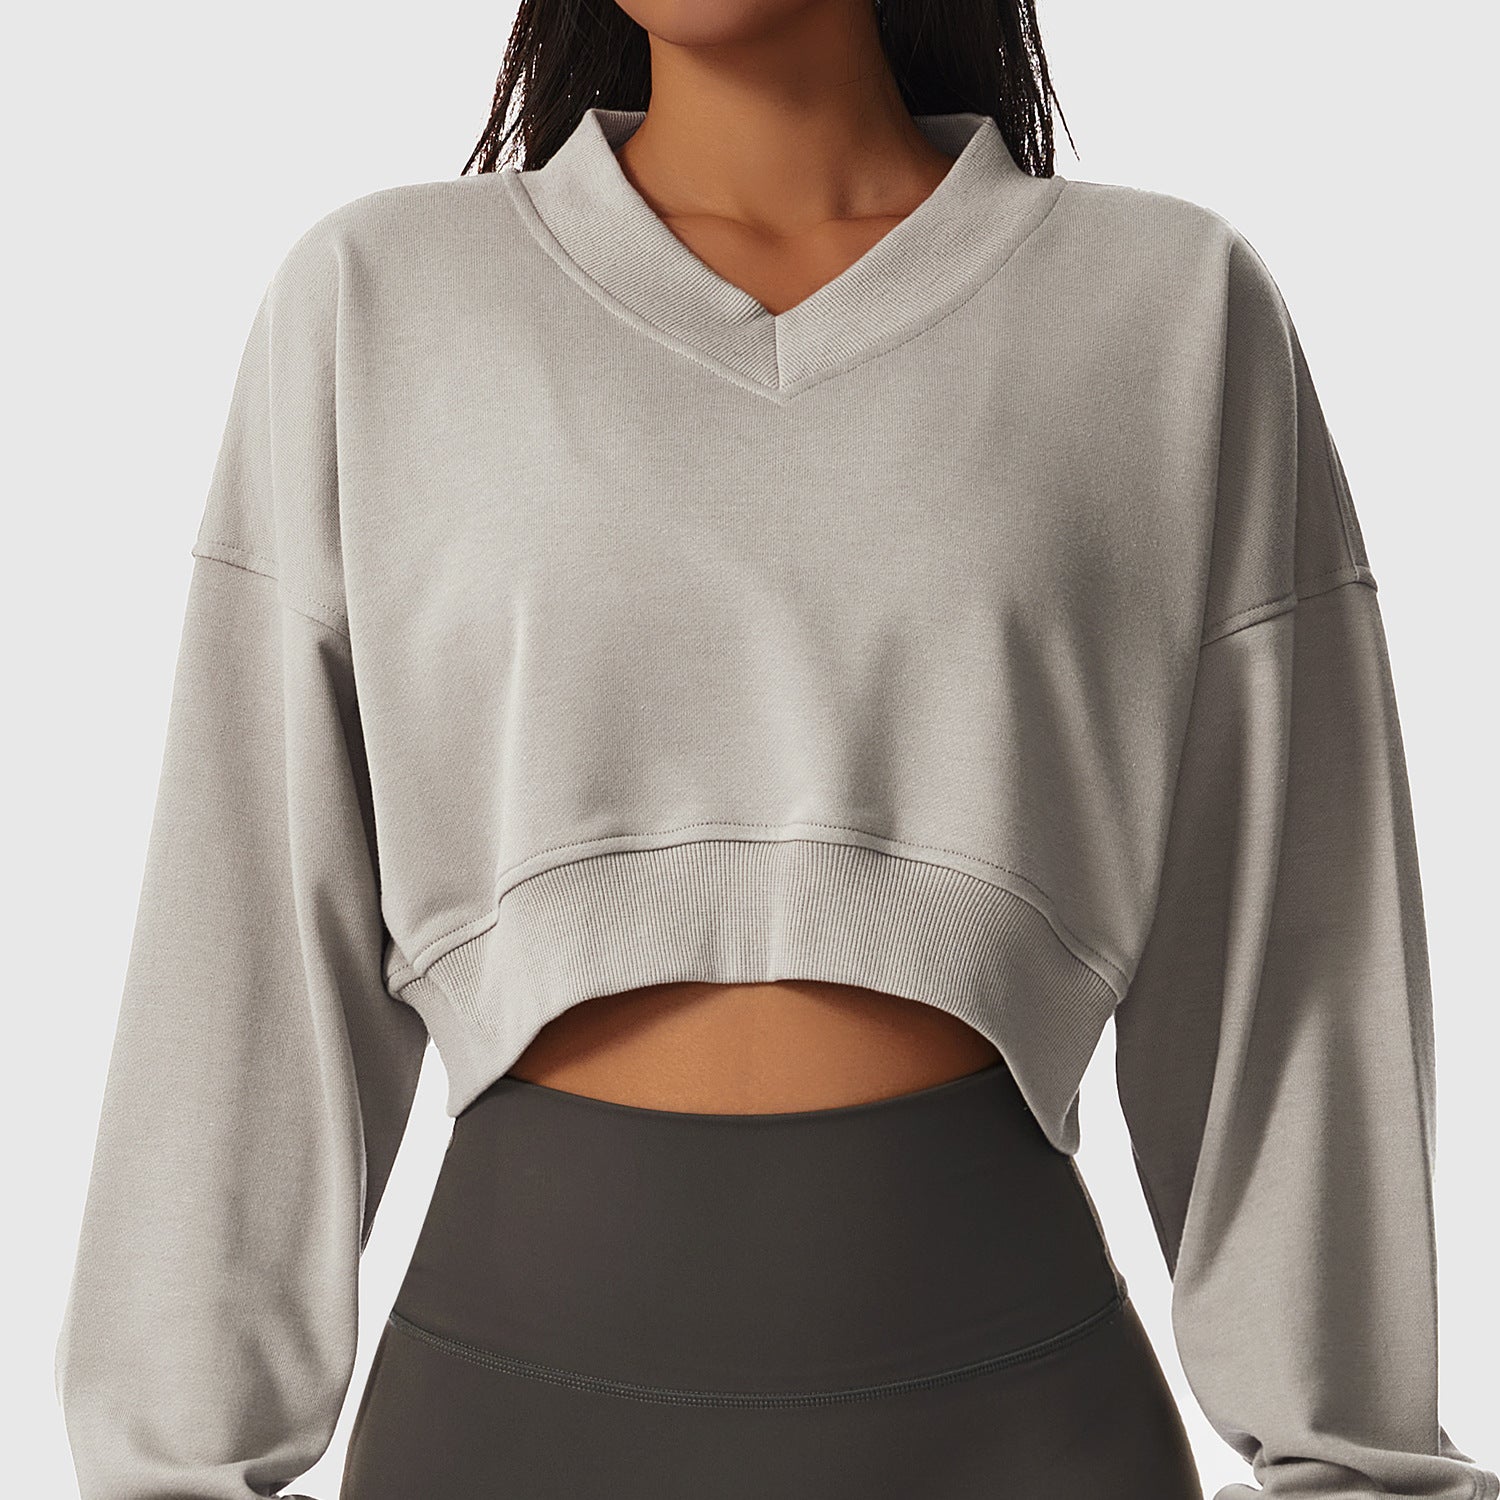 Loose Long Sleeve Sports Sweater For Women Outdoor Fitness Wear V-Neck Pullover Casual Top Fashionable Versatile Sweater